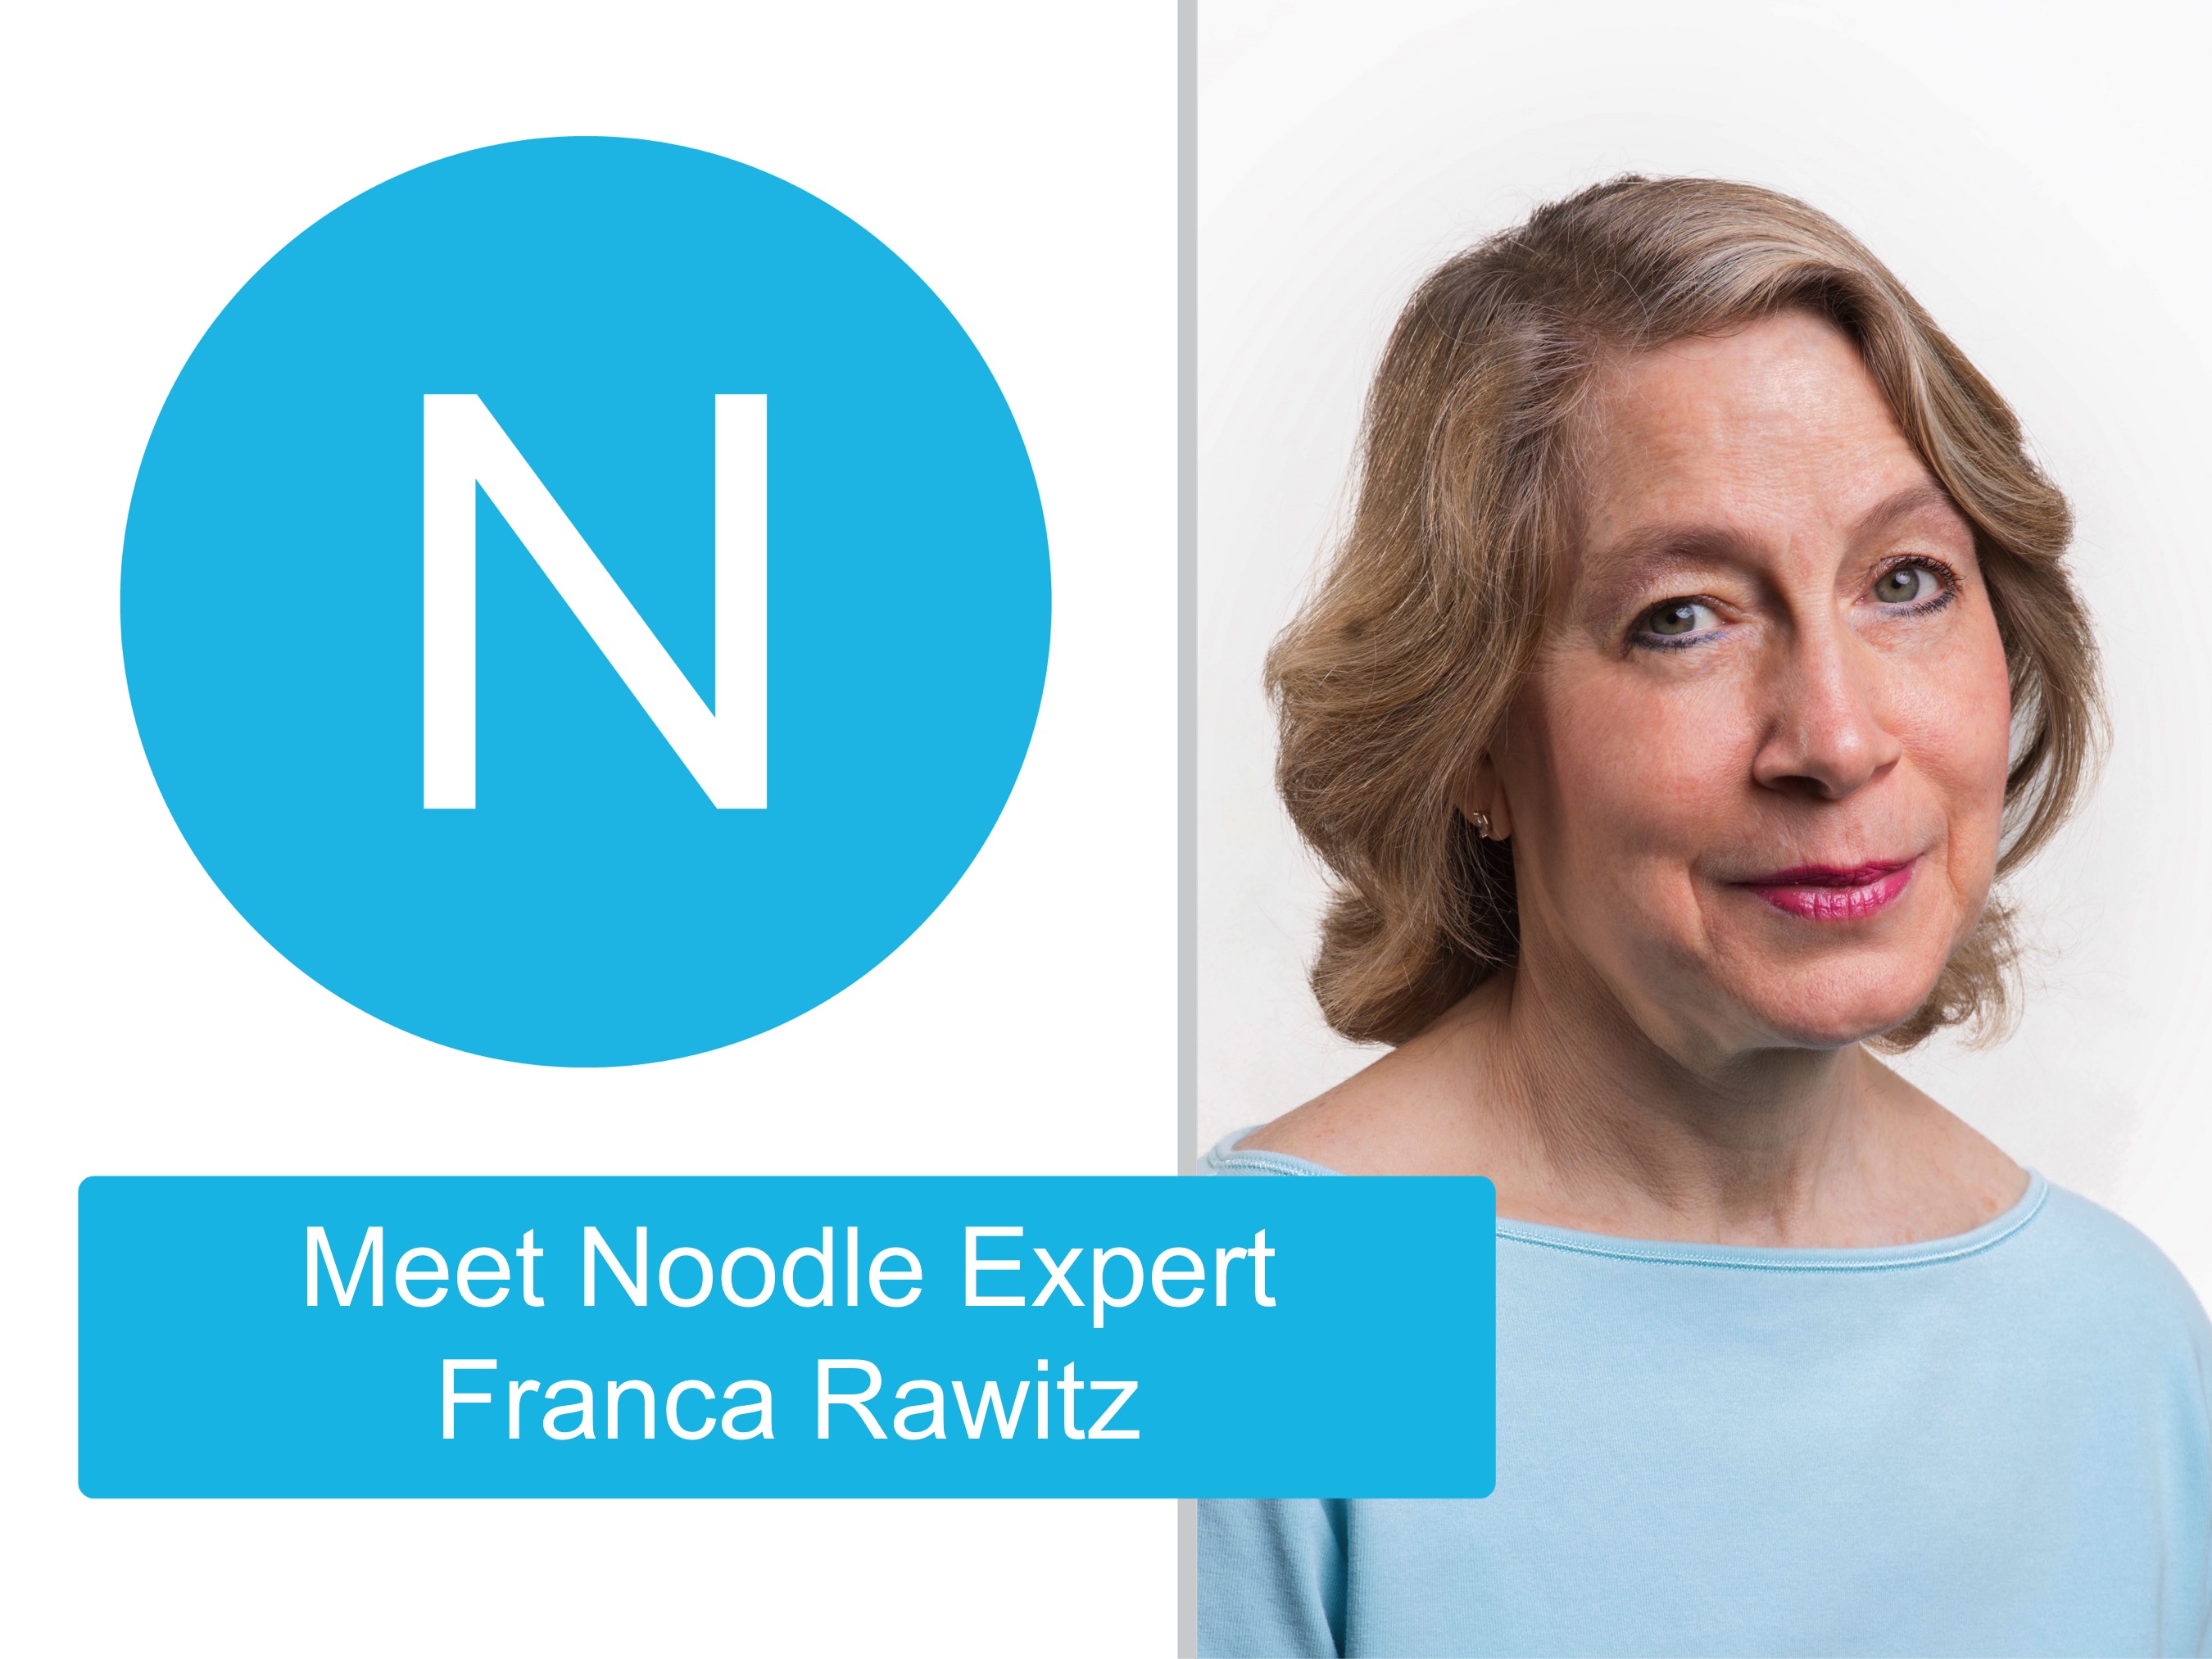 Franca Rawitz on Traveling Cross-Country and Differentiating Wants and Needs